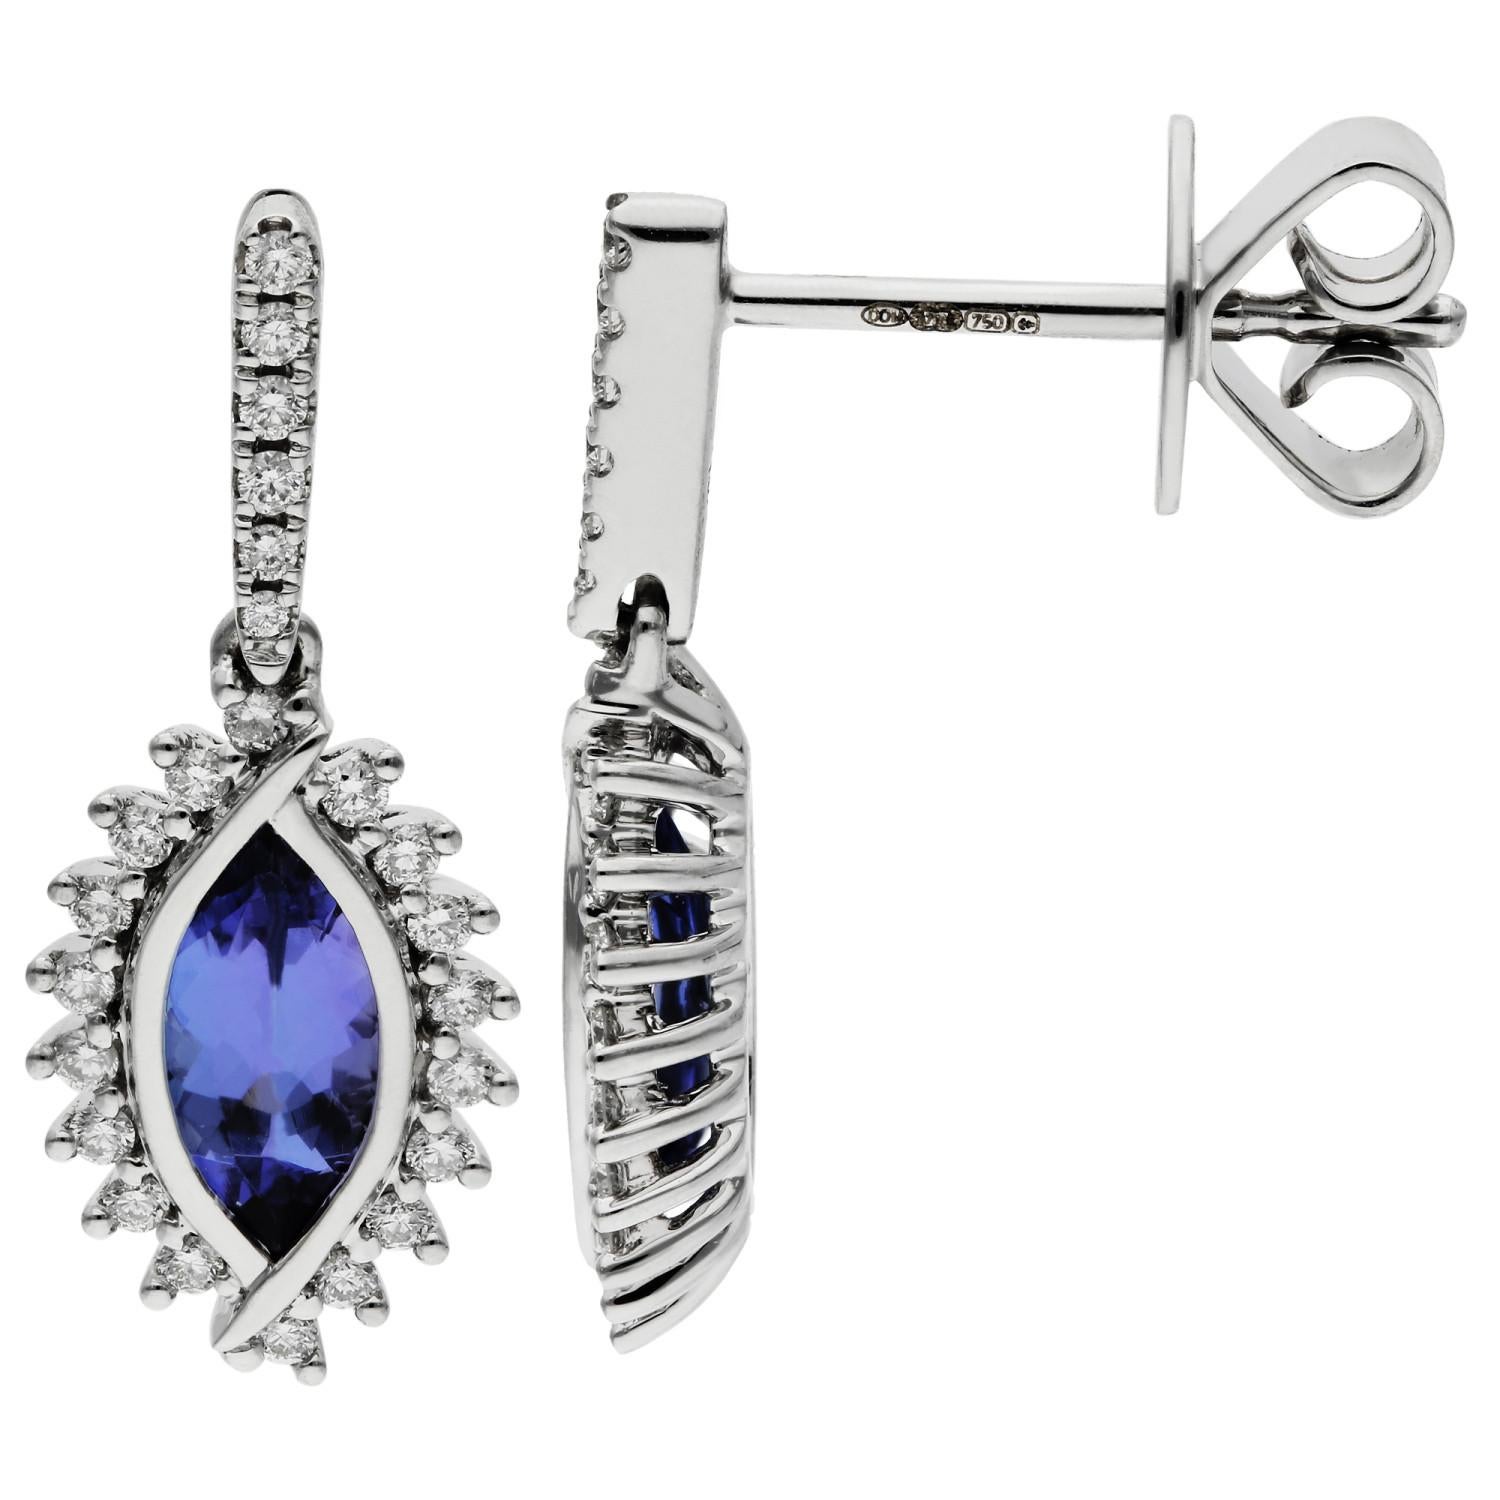 18ct White Gold 1.06ct Tanzanite & 0.23ct Diamond Drop Earrings

Introducing our exquisite 18ct White Gold Tanzanite & Diamond Drop Earrings, a masterpiece of elegance and contemporary design. Each earring features a marquise-cut tanzanite, renowned